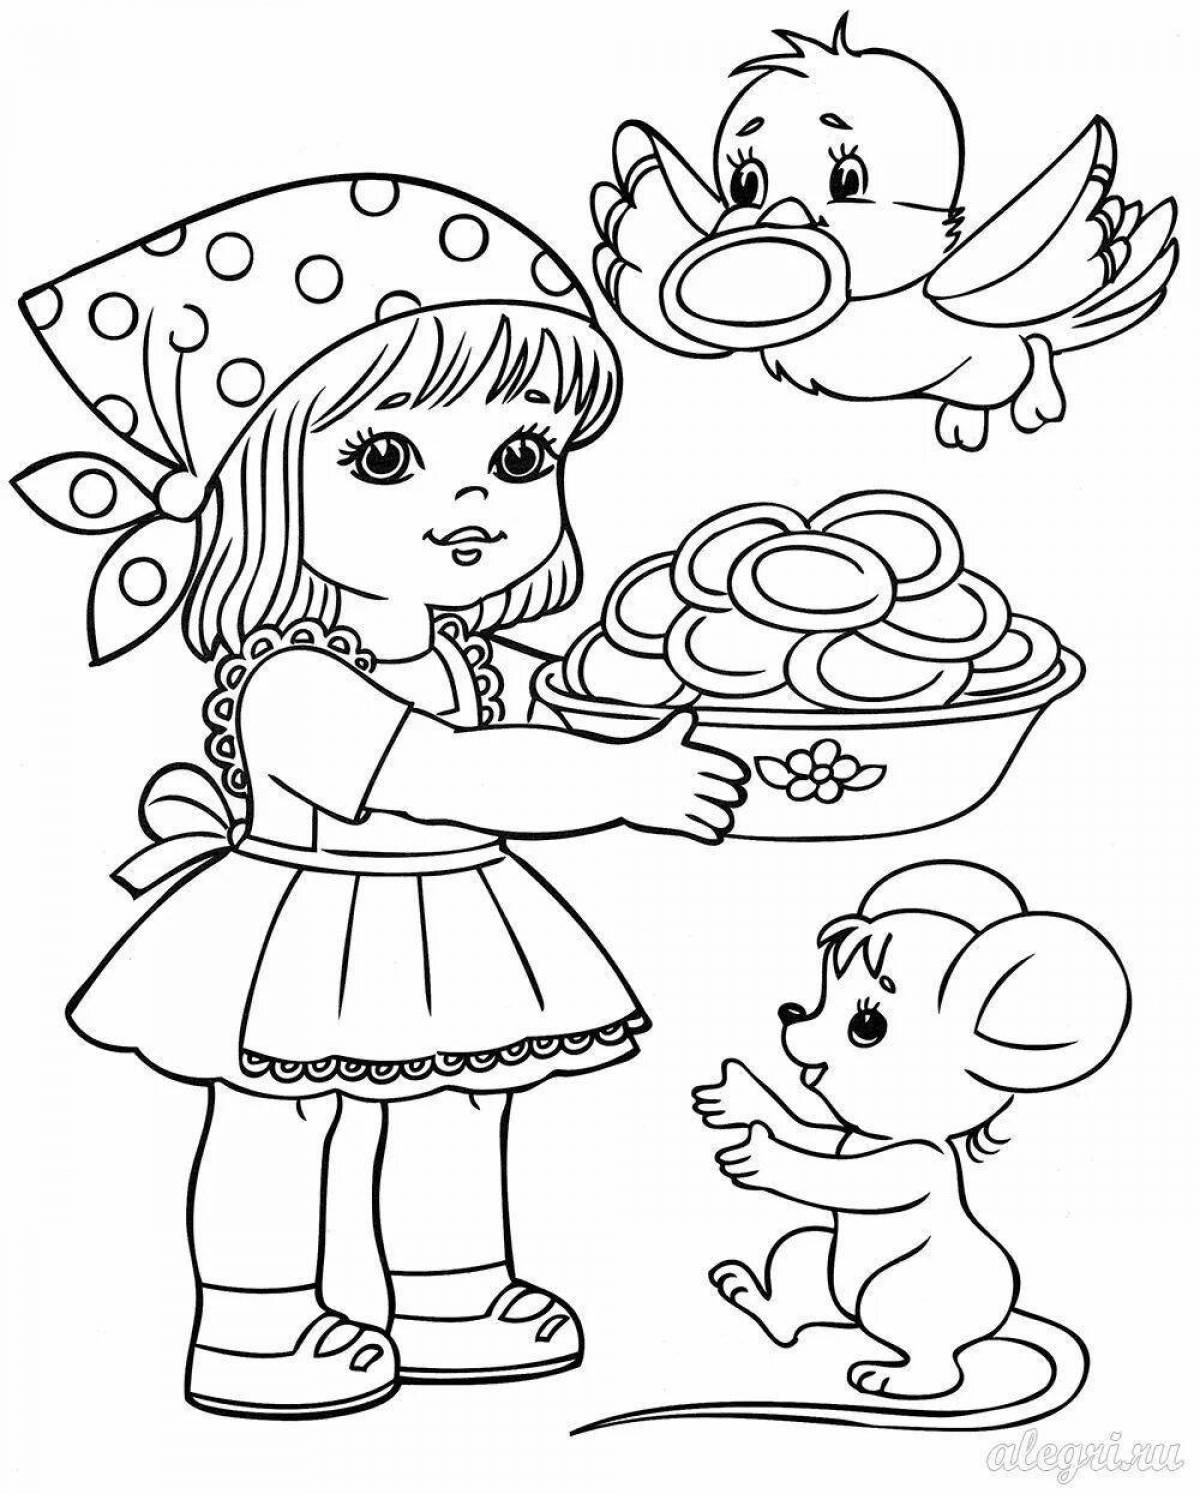 Exquisite carnival coloring book for kids